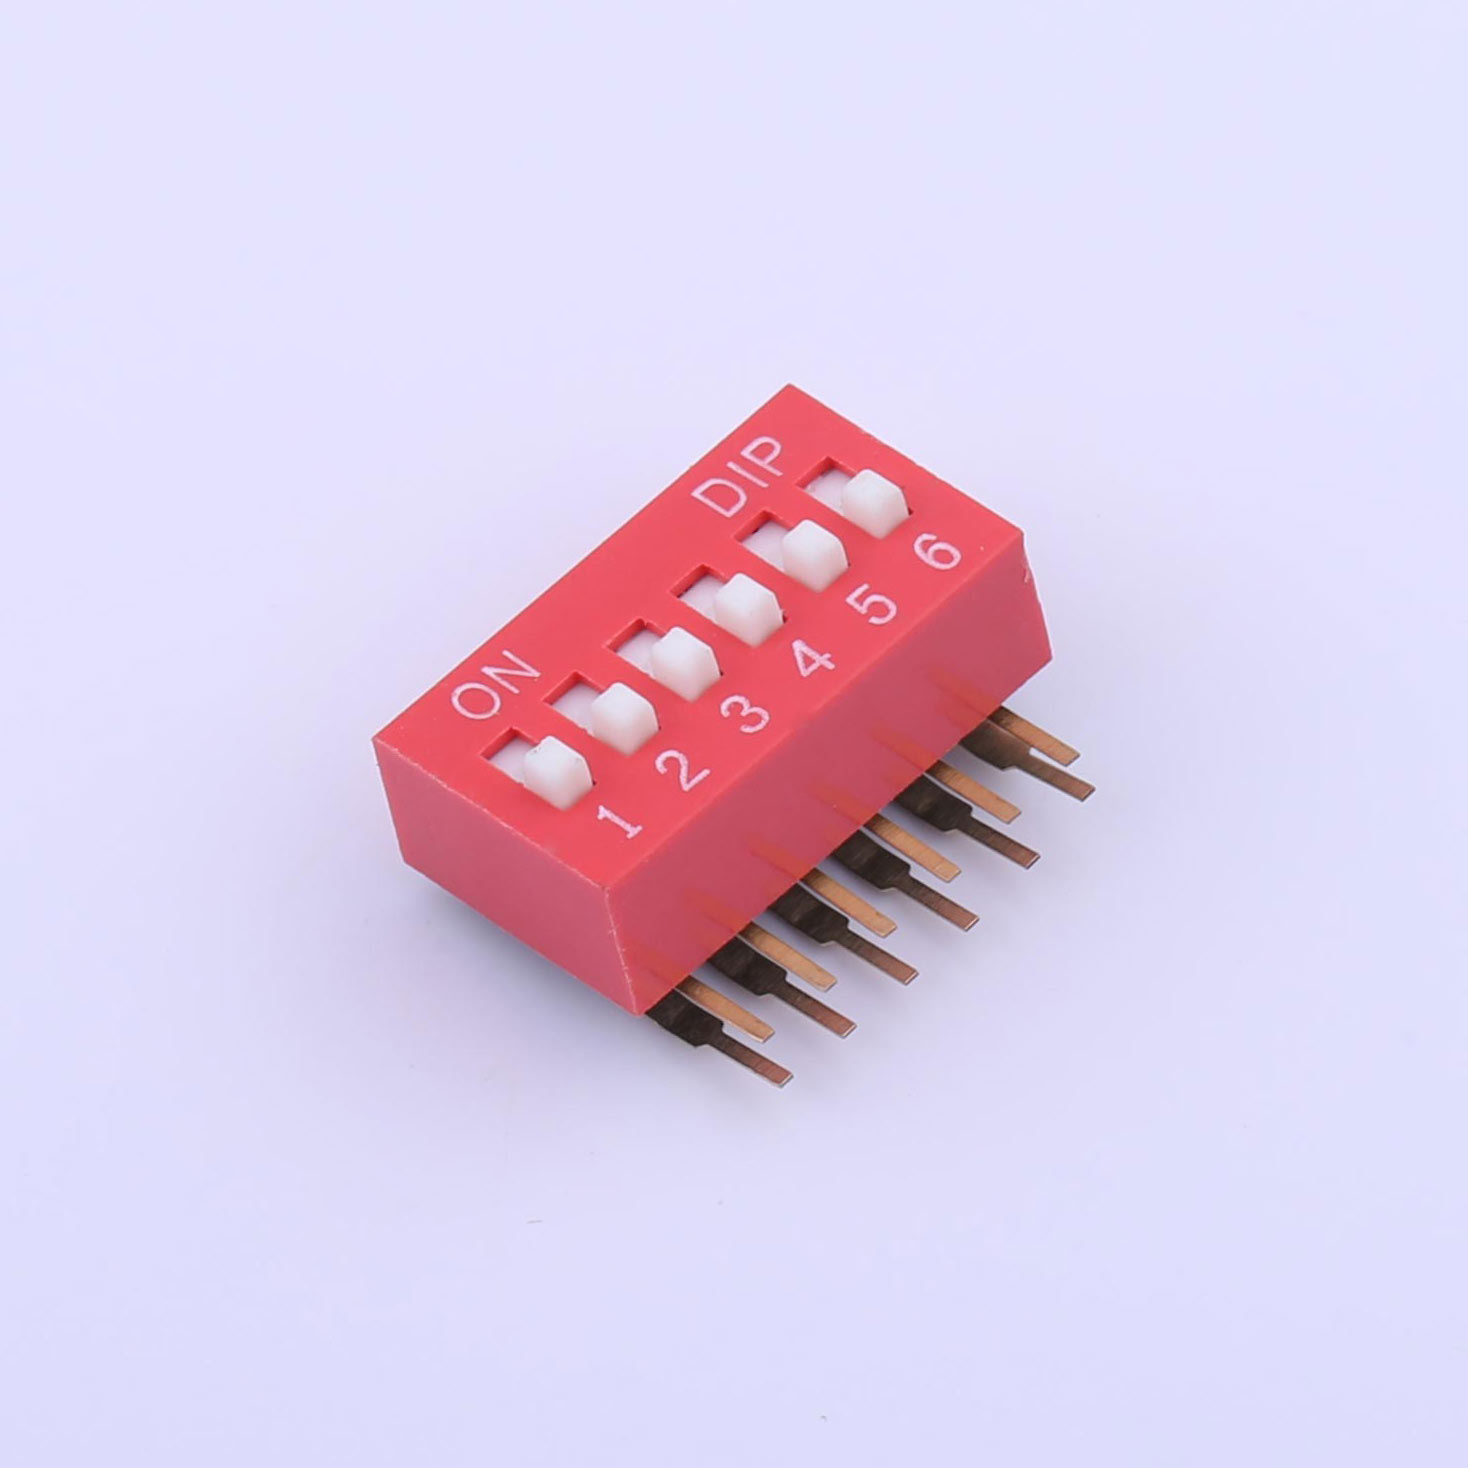 Kinghelm Pitch 2.54mm 6 Positions Red Dip Switch 100mA 24V - KH-BM2.54-6P-W